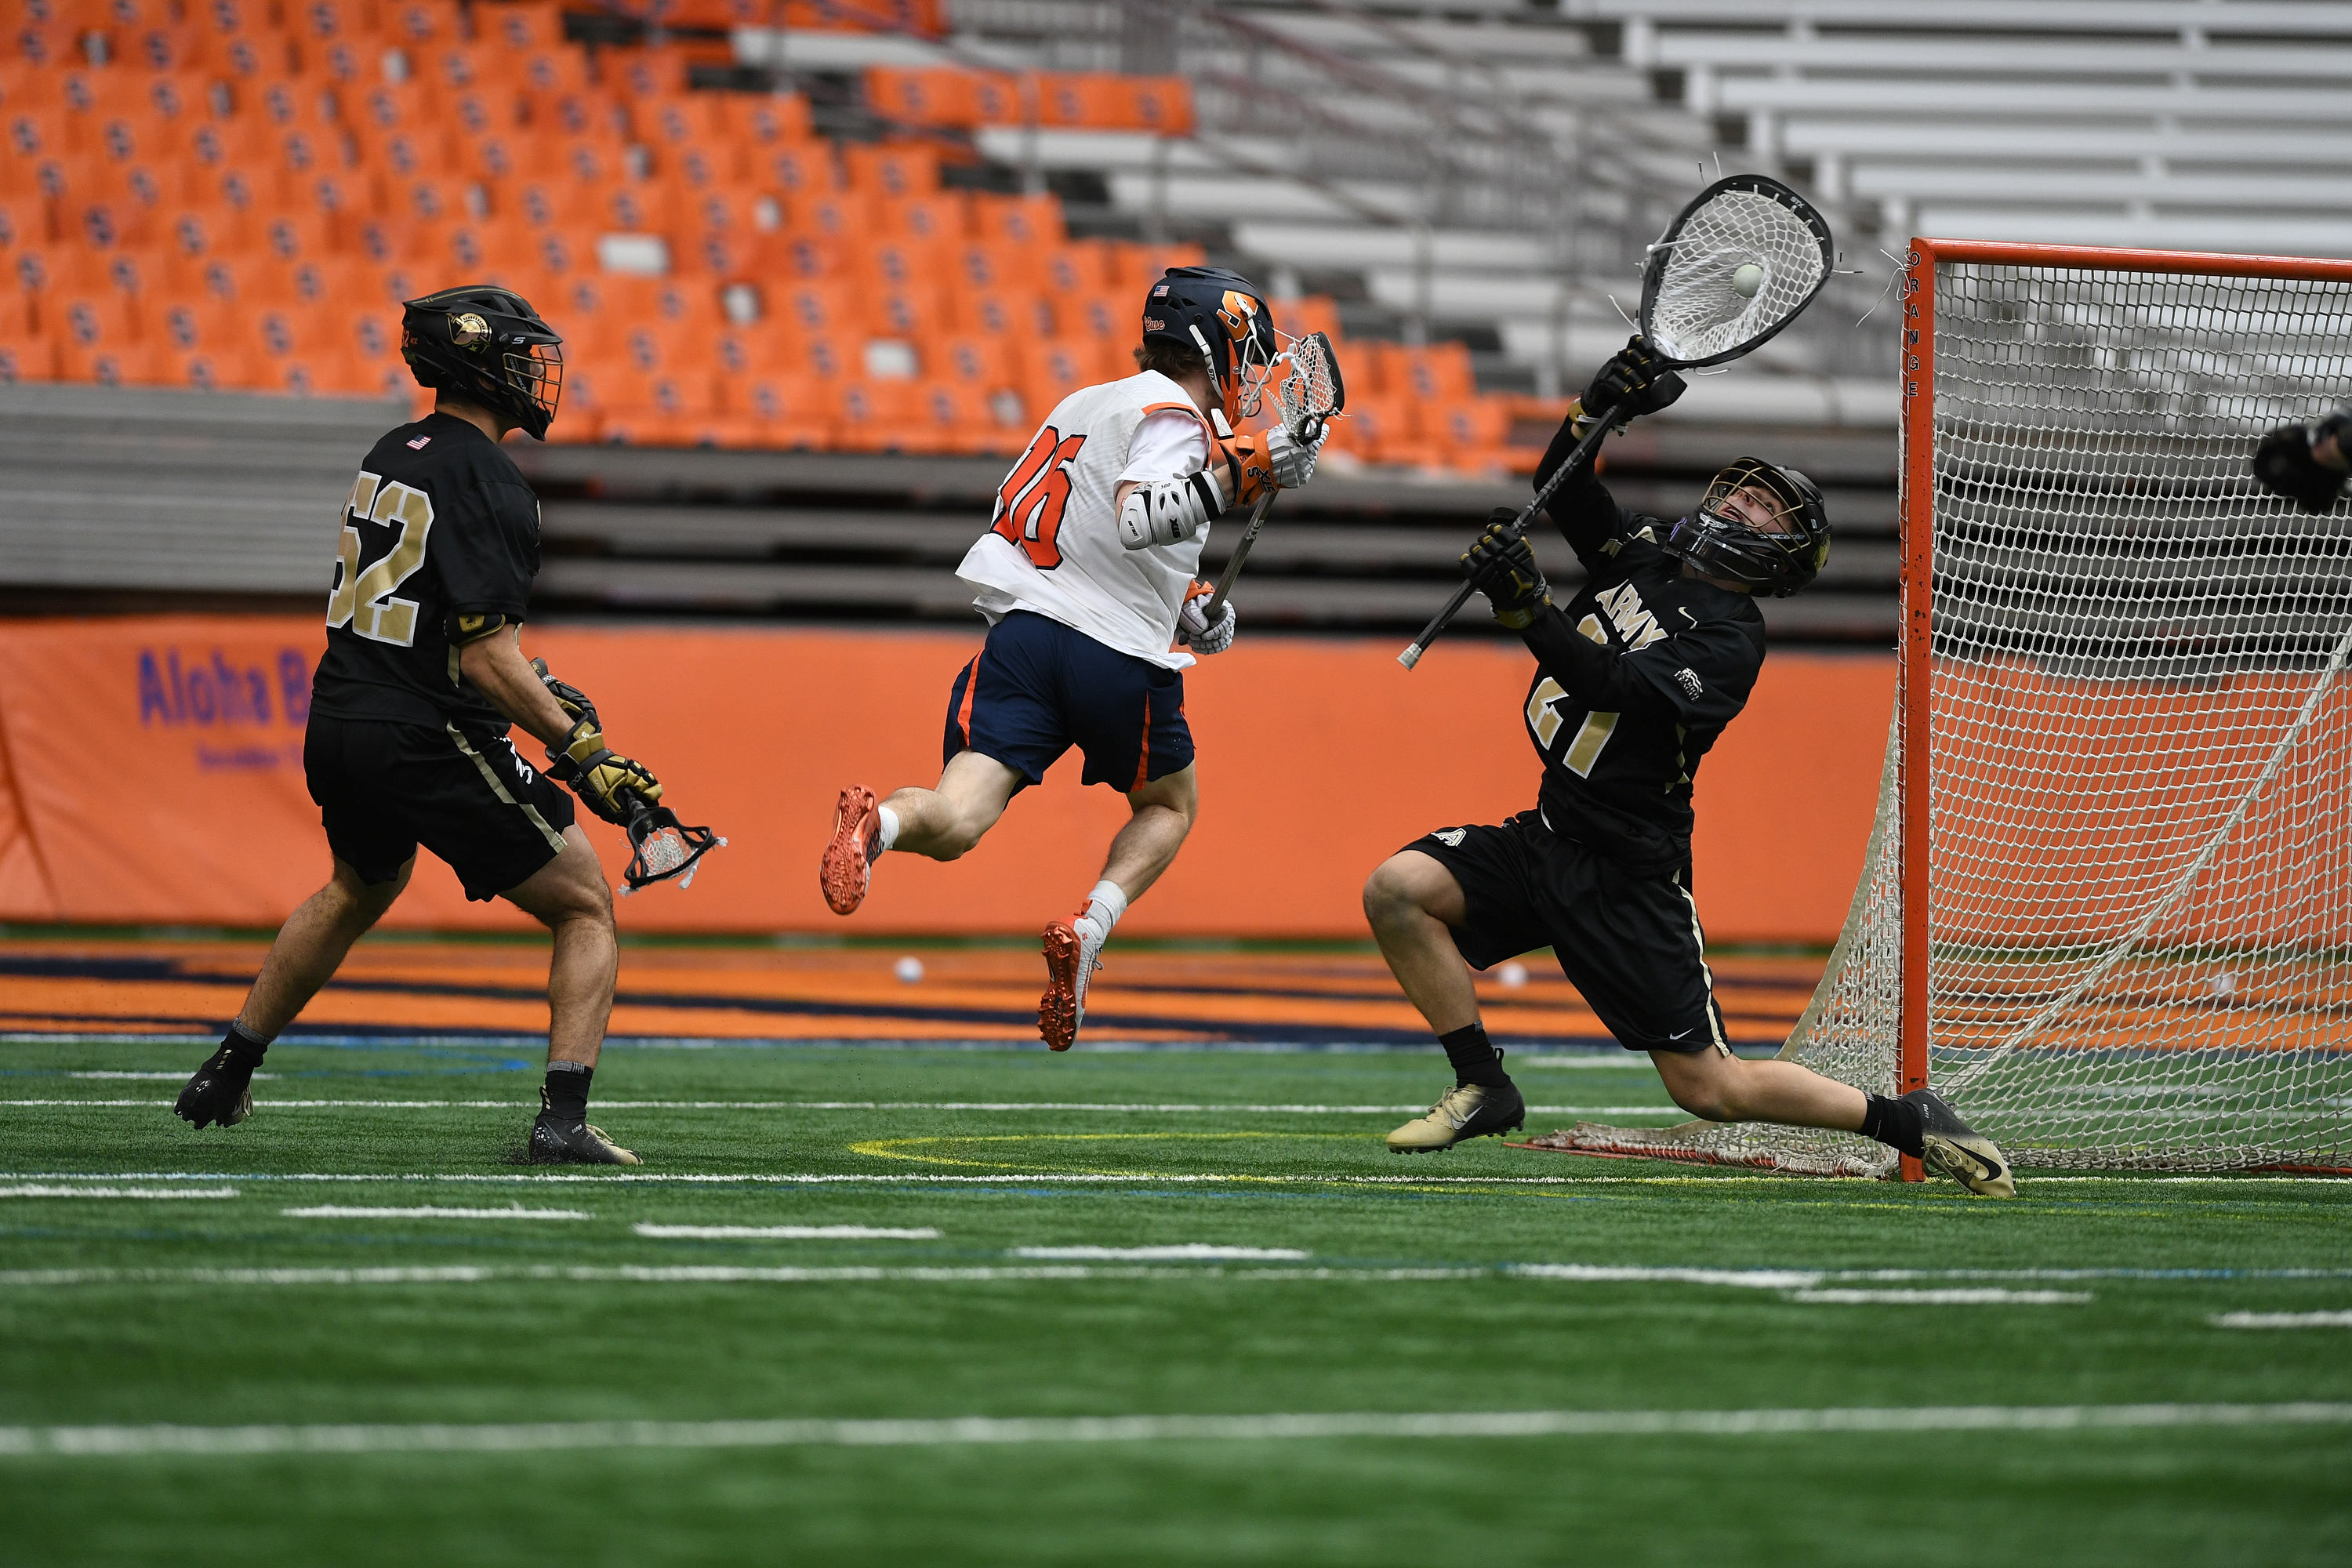 Army goalie Wyatt Schupler saves a shot by Syracuse’s Brendan Curry during the game at the Carrier Dome on Feb. 23, 2020.